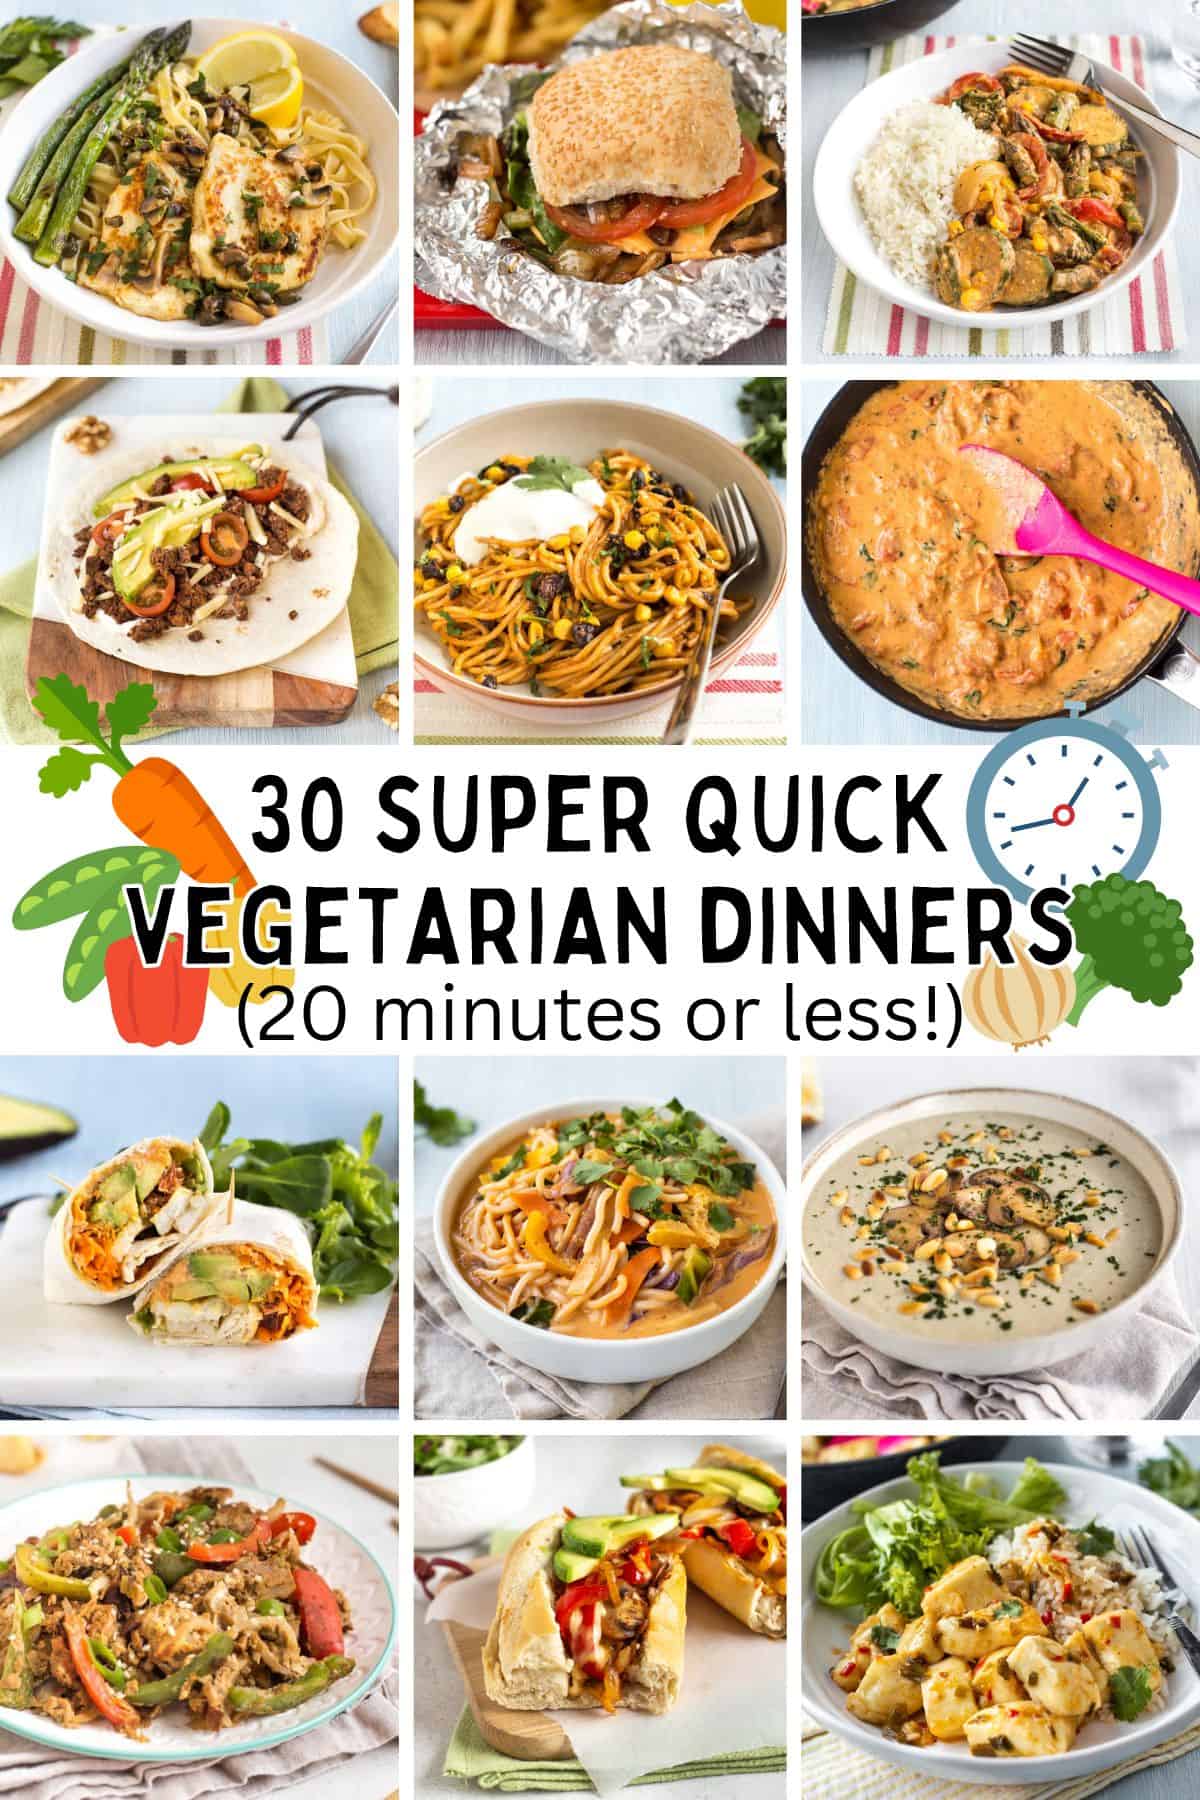 21 Day Fix Quick Dinners {30 Minutes or Less!} - The Foodie and